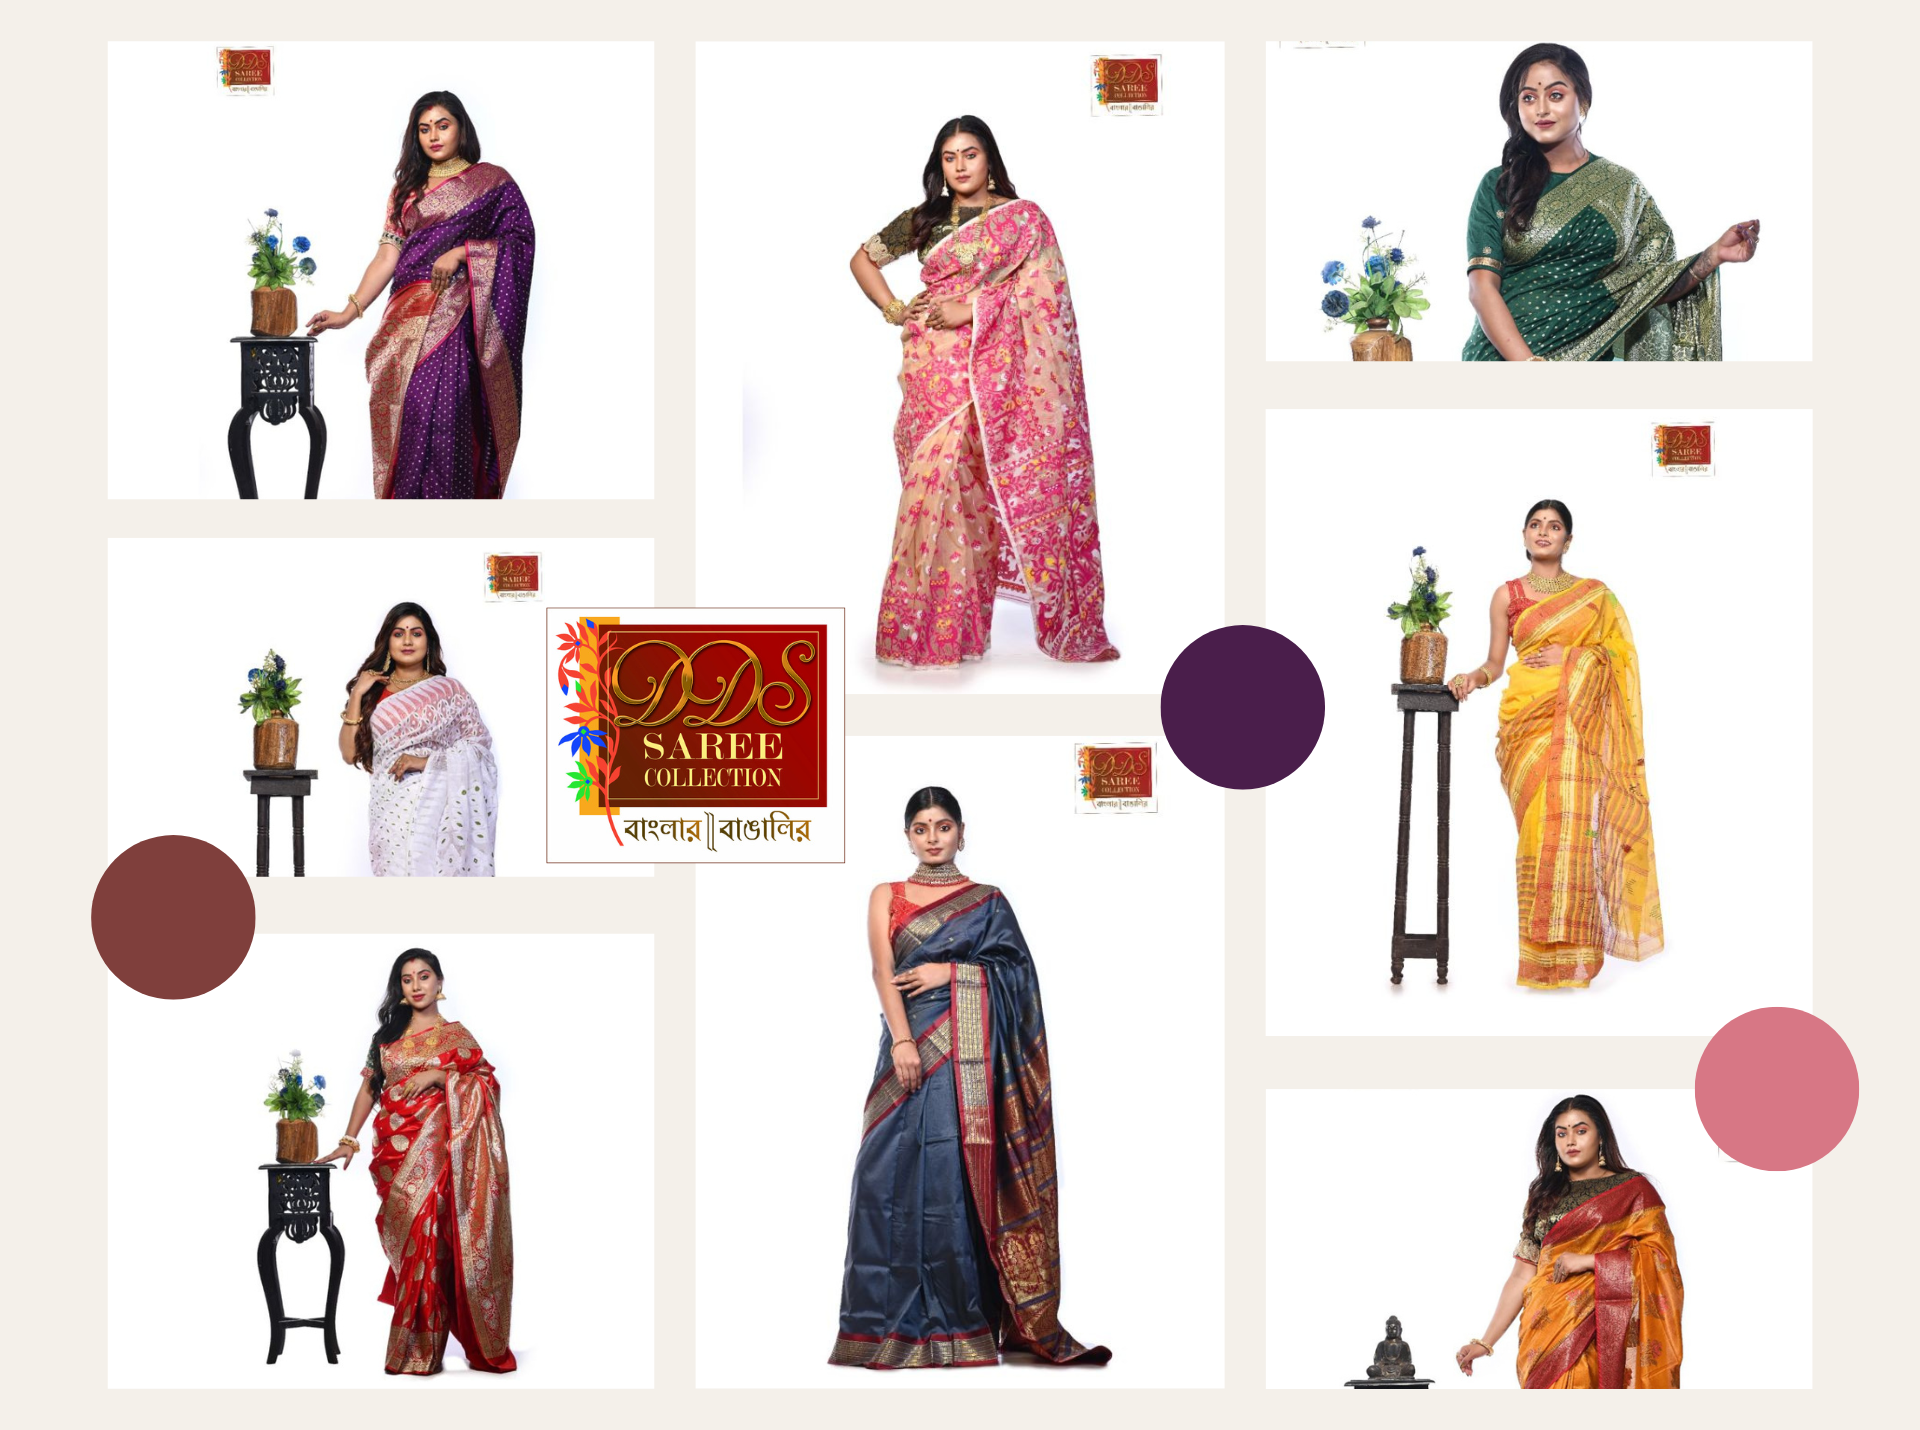 DDS Saree Collection is an Indian Saree House headquartered in Kolkata.